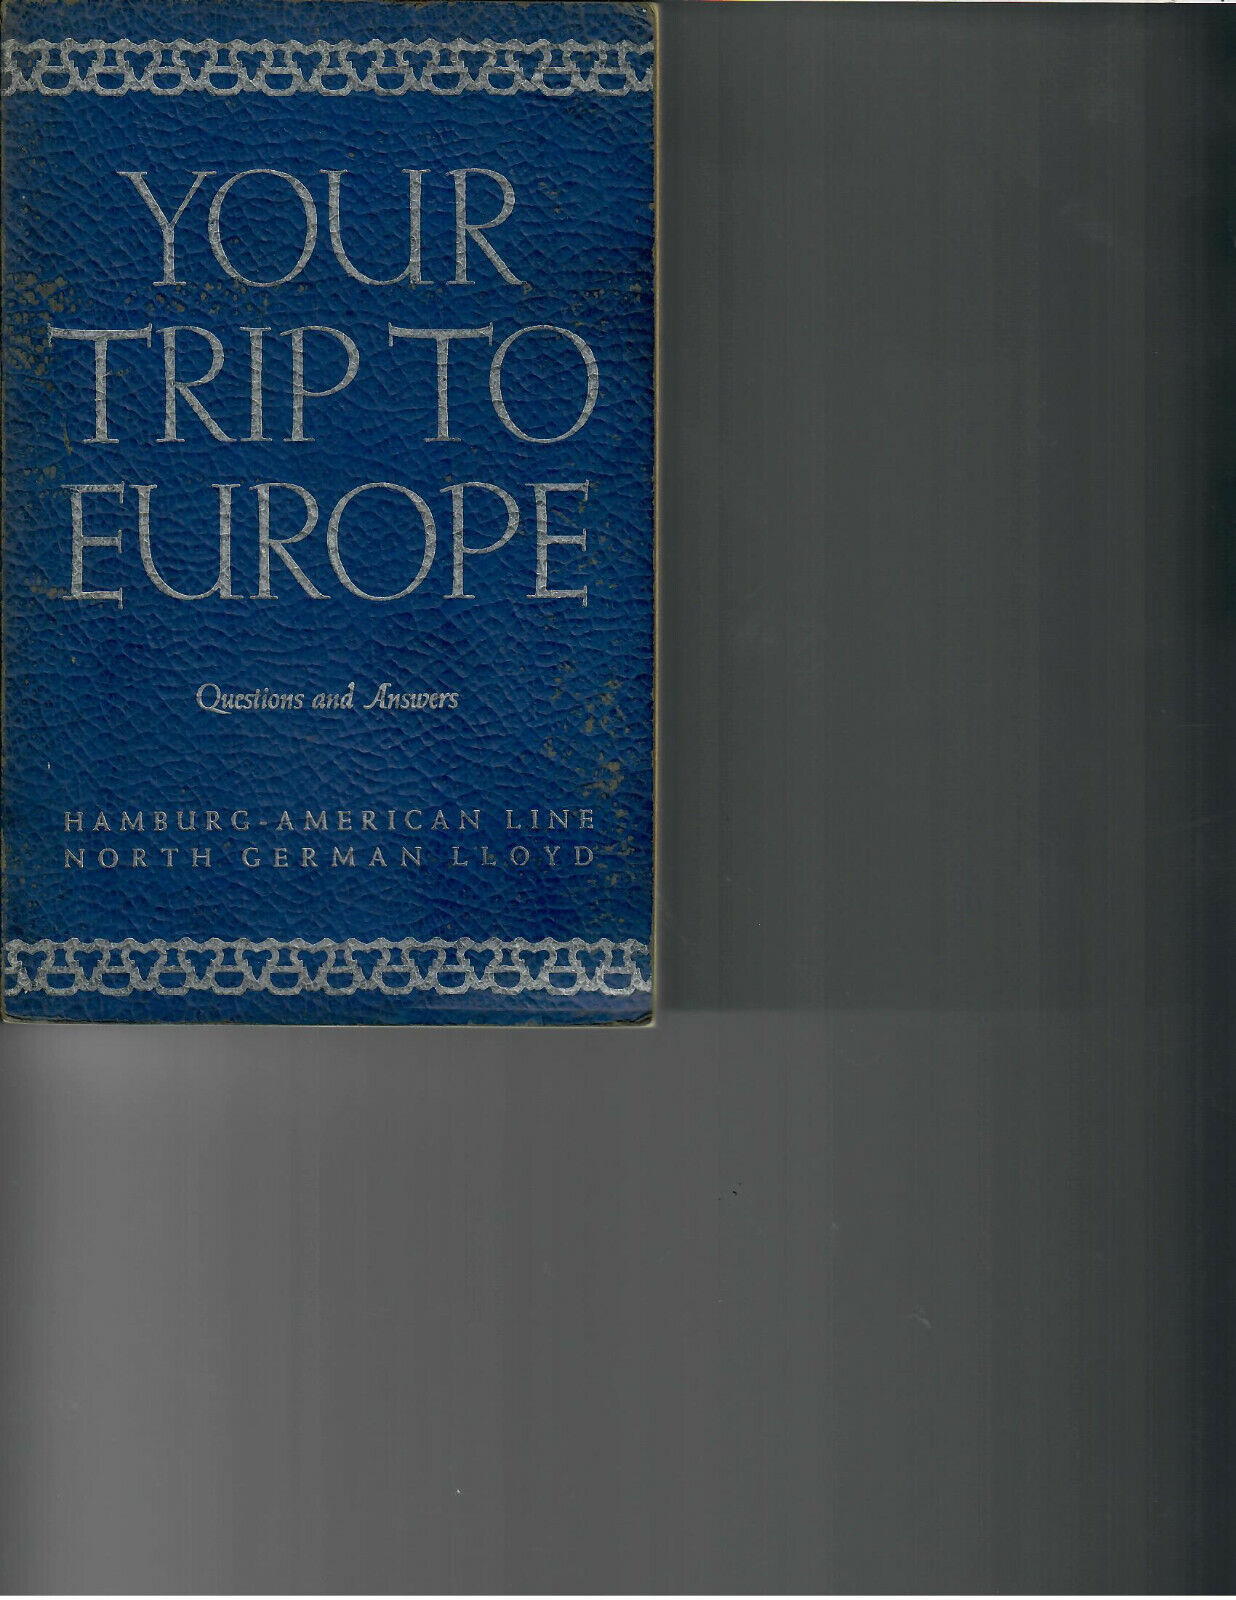 Hamburg-American Line, Your Trip to Europe Questions and Answers 1939 edition